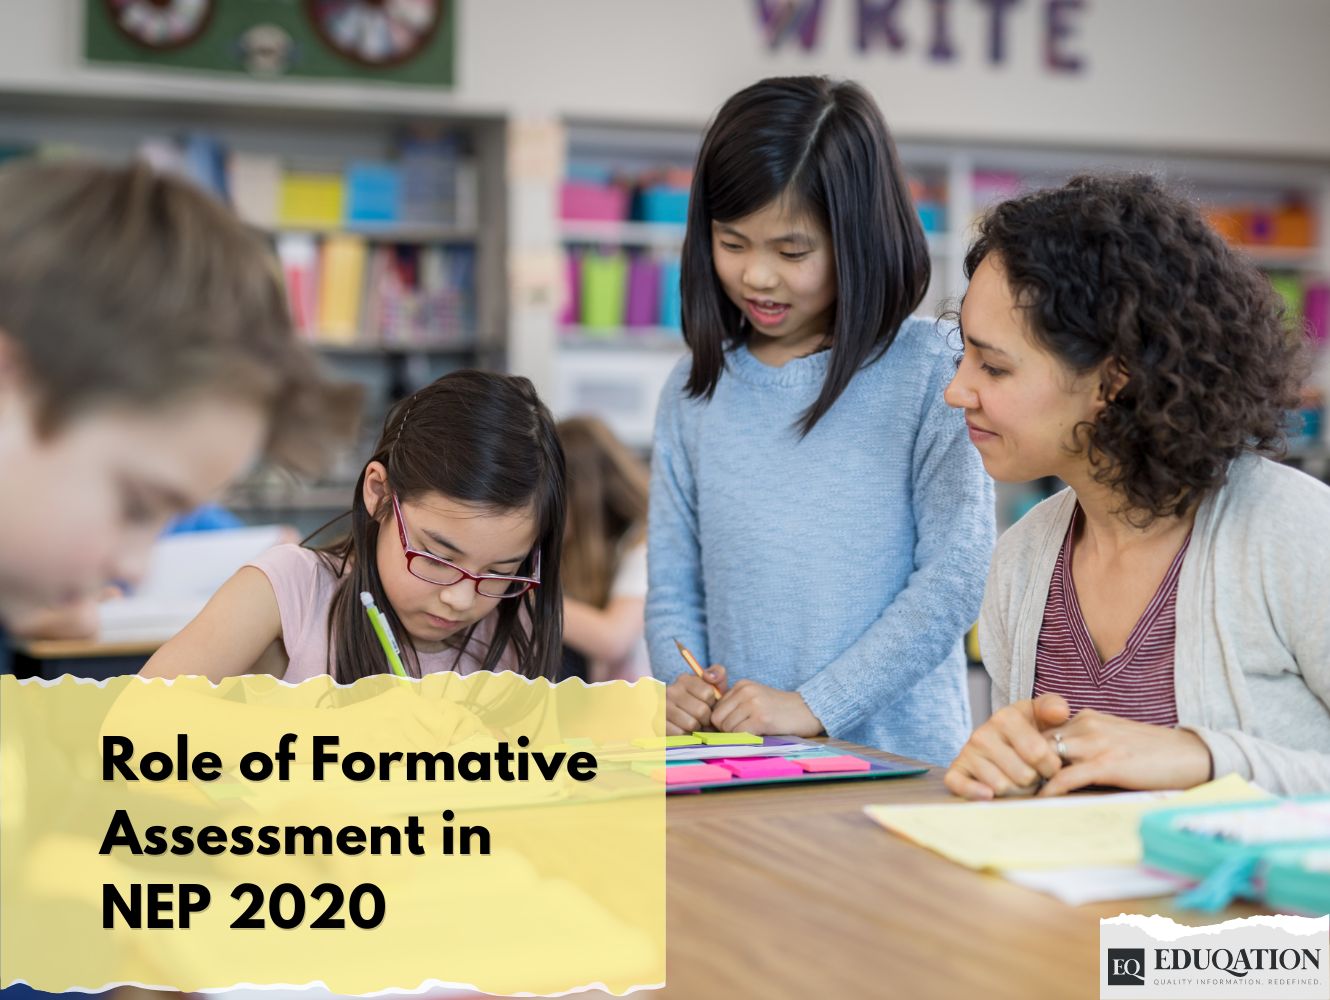 Formative Assessment in NEP 2020